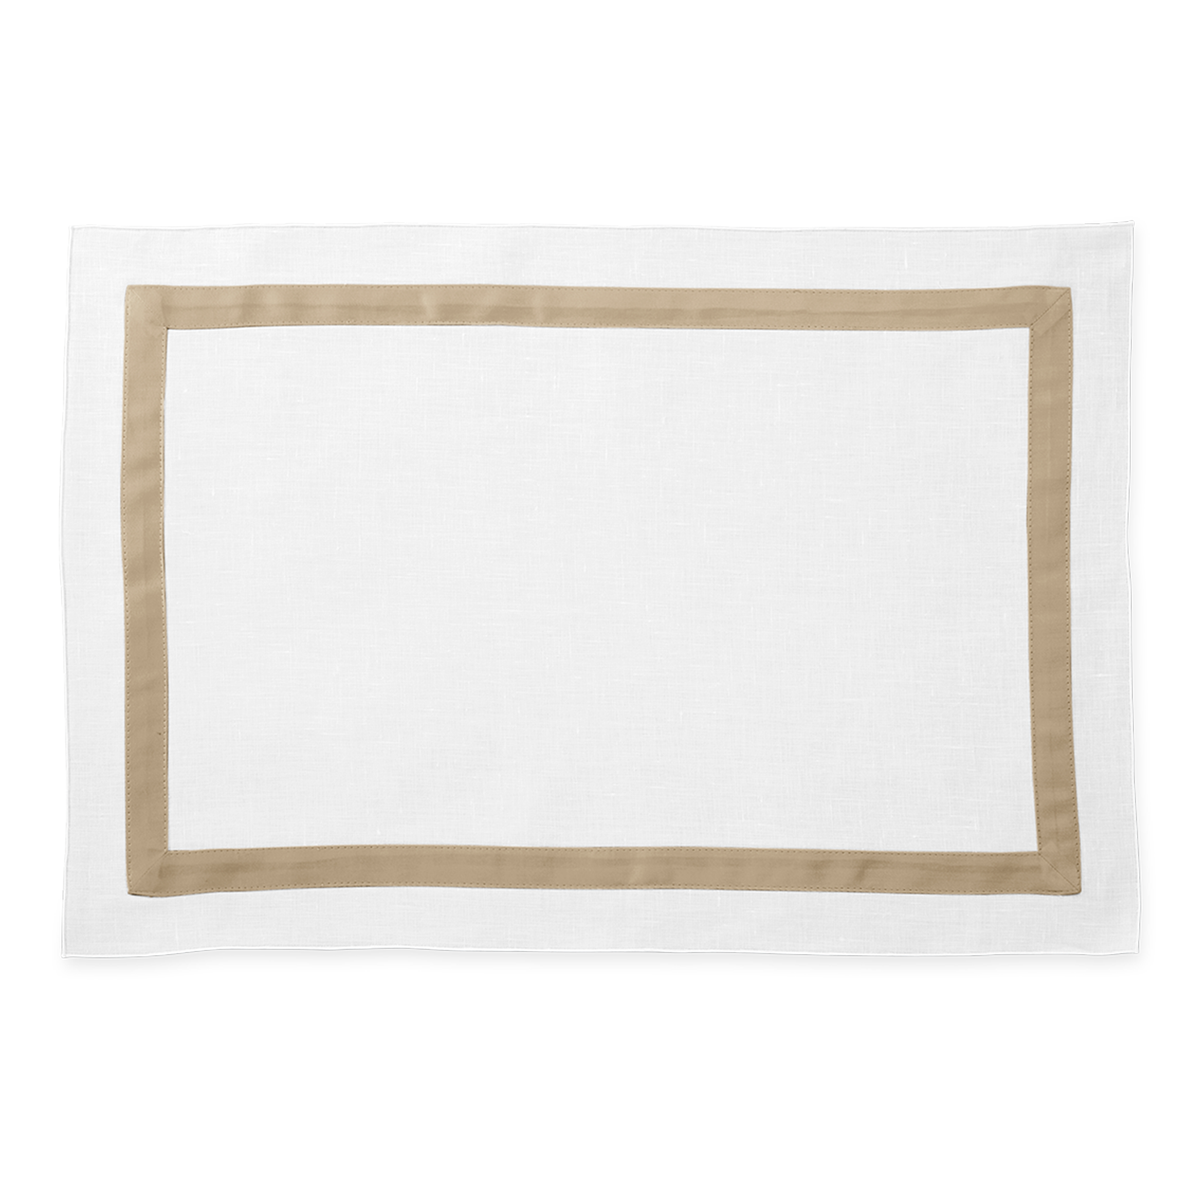 Placemat of Matouk Schumacher Lowell Table Linens in Color Champagne